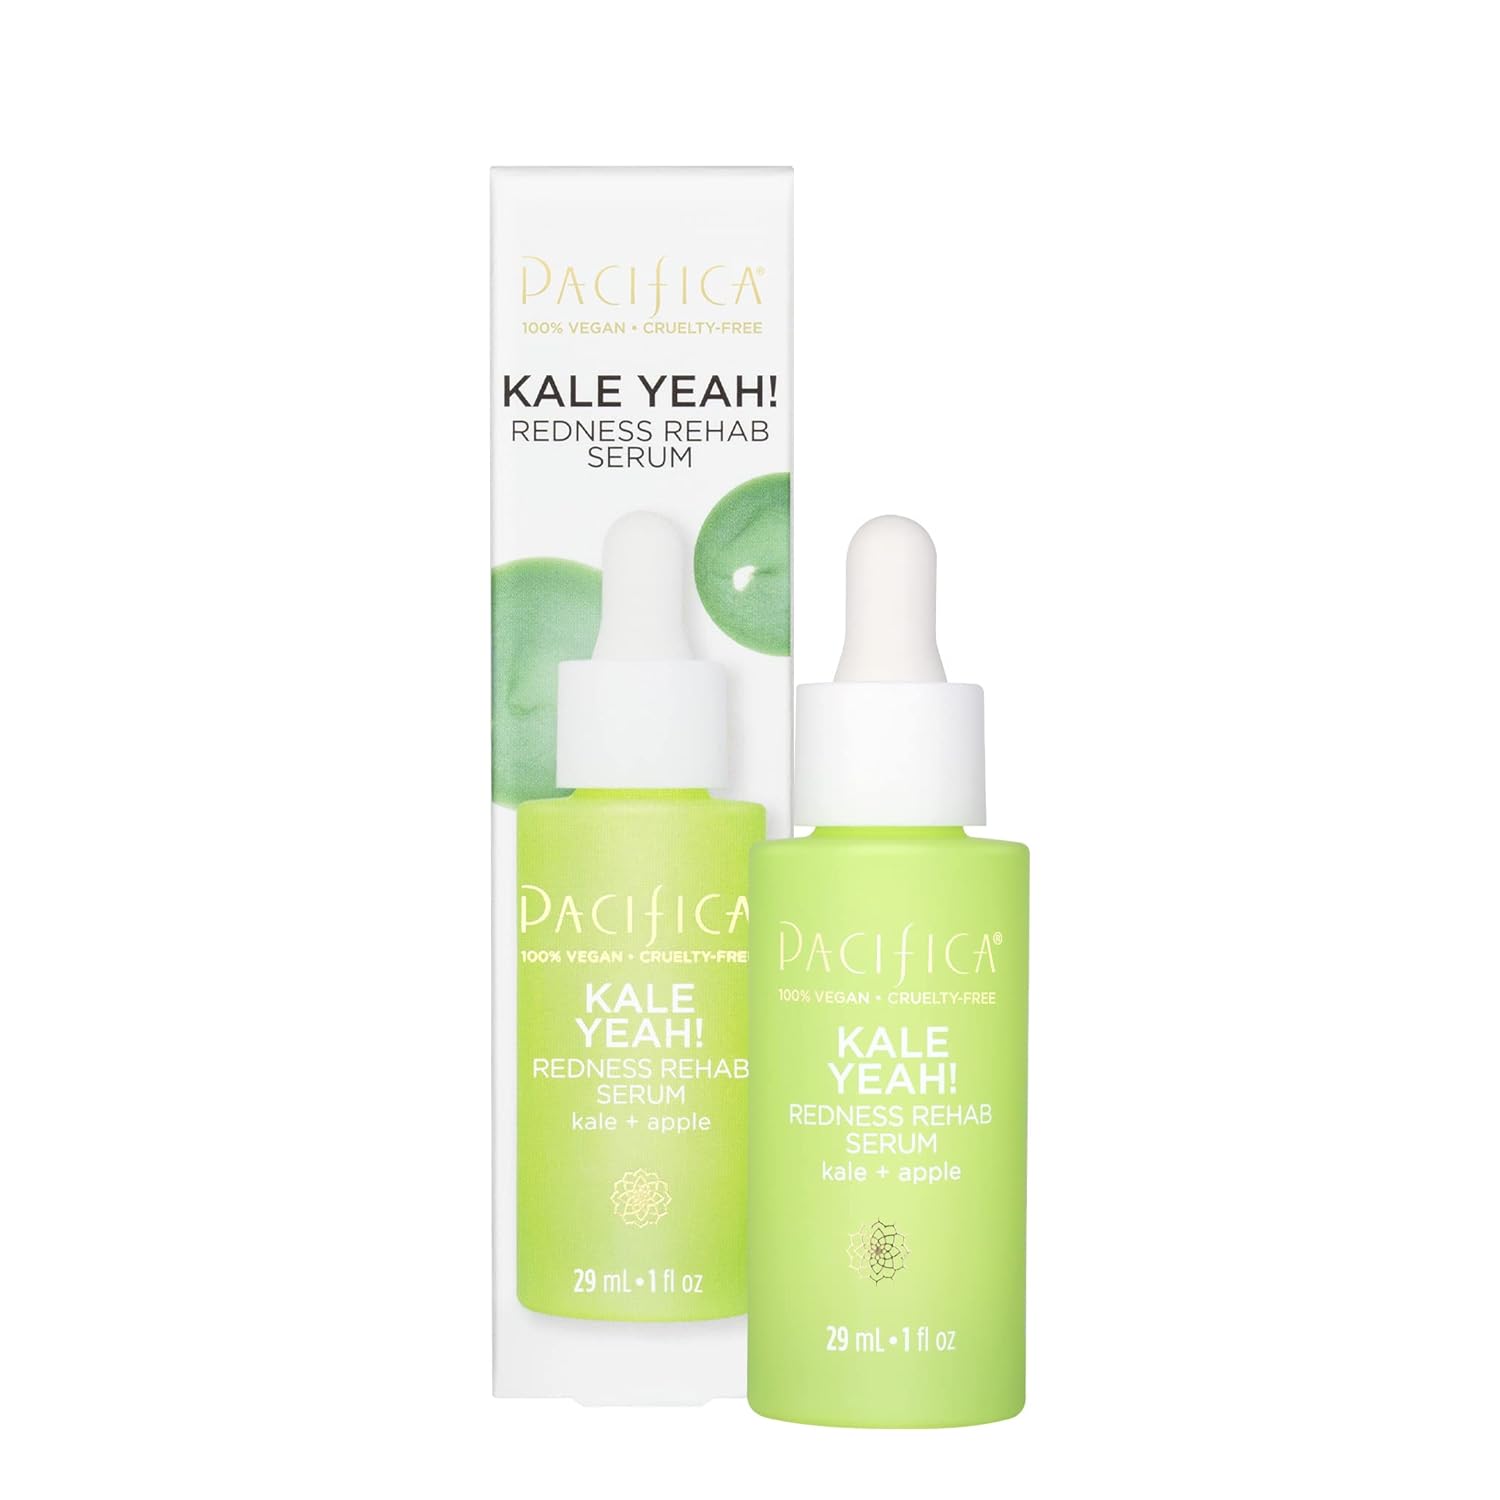 Pacifica Beauty, Kale Yeah! Redness Rehab Serum, Reduce Redness, Minimize Pore Size, Oily Skin Control, Niacinamide, Pea Proteins, Copper Peptides, Super Greens, Combination & Oily Skin Types, Vegan